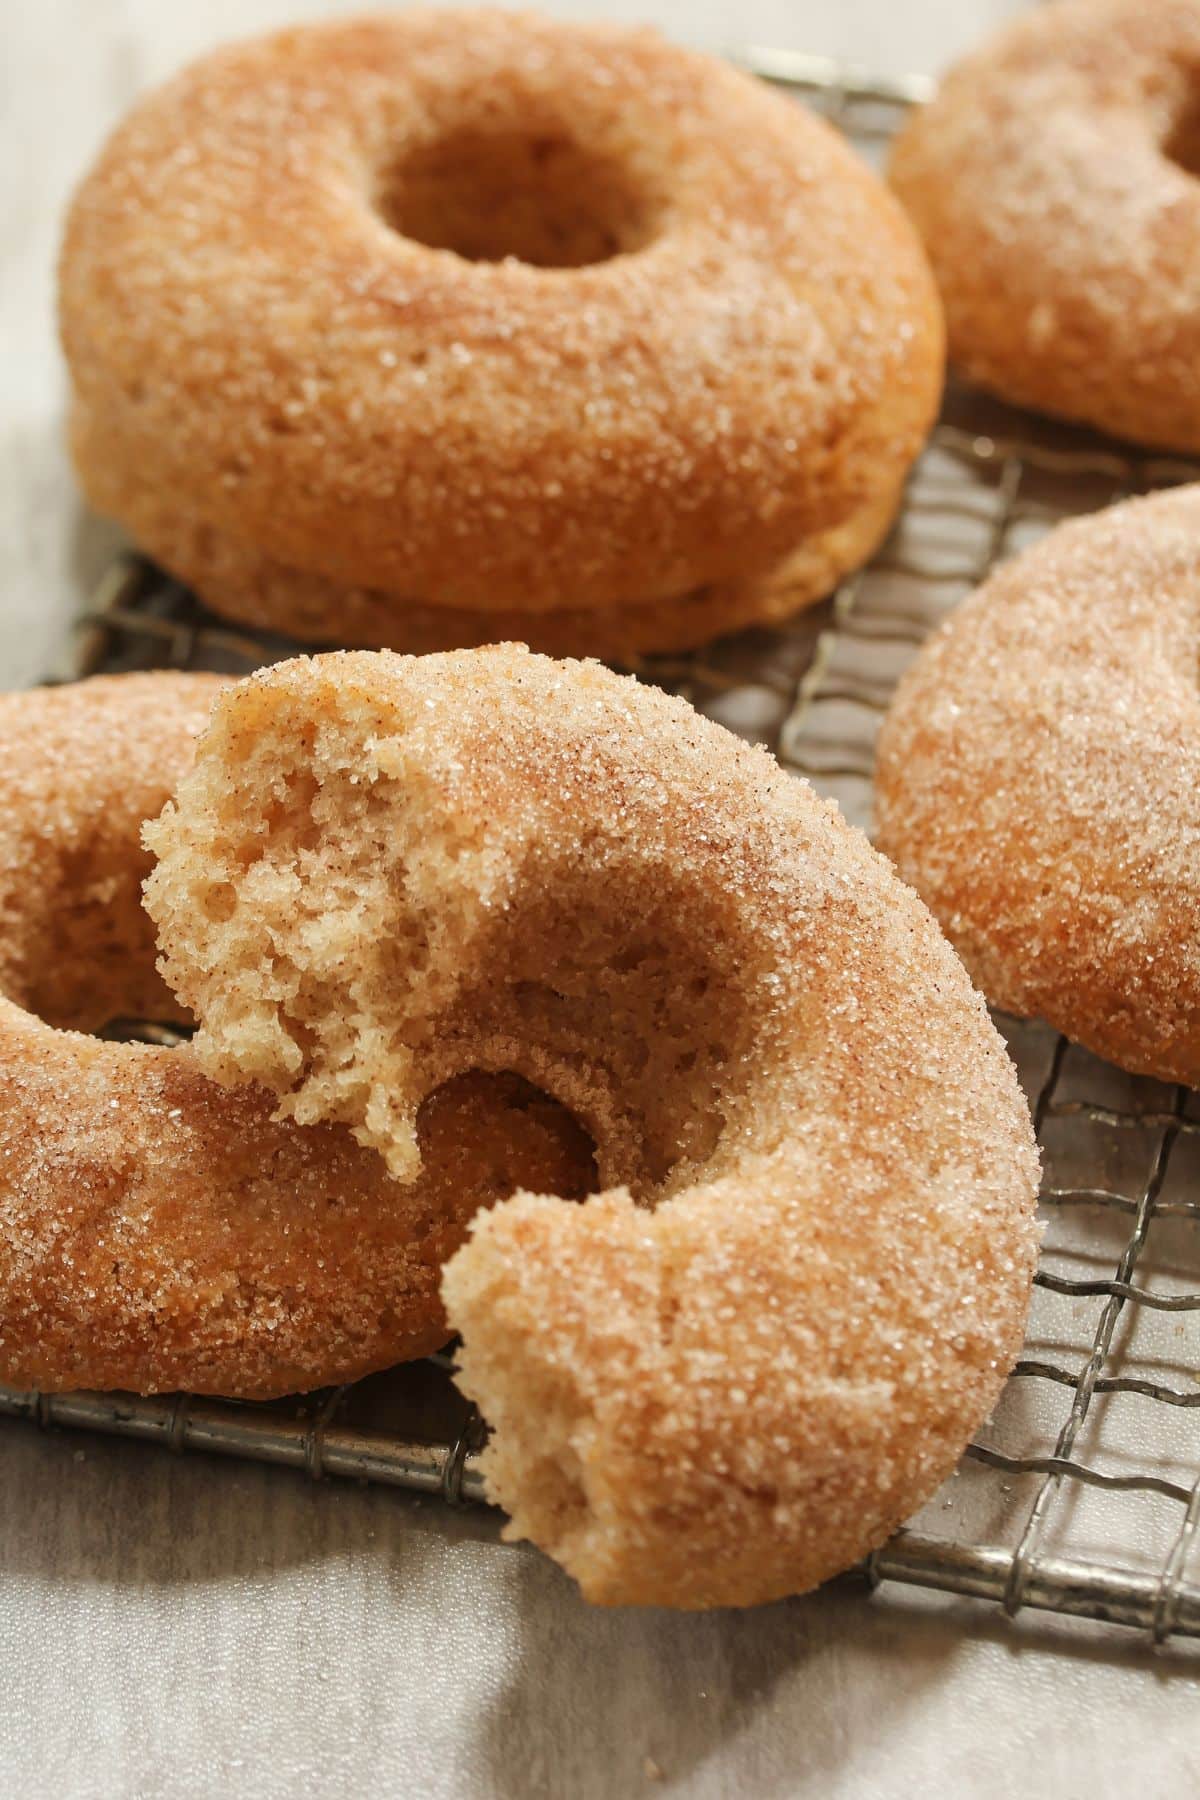 Apple Cider doughnuts with cinnamon sugar on cooling rack.